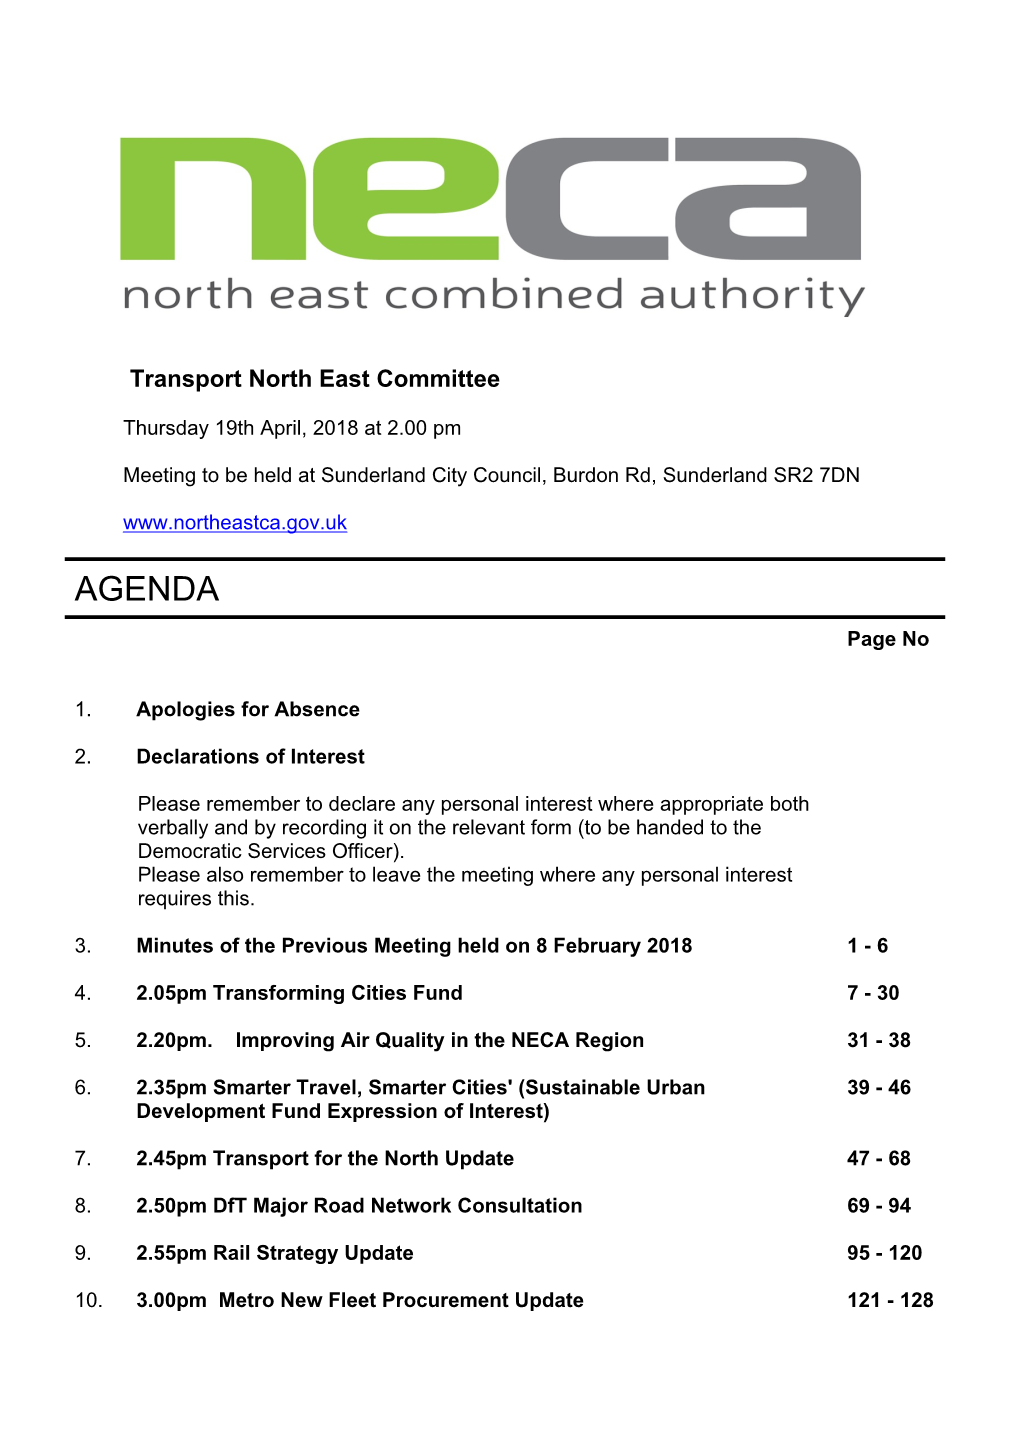 (Public Pack)Agenda Document for North East Combined Authority